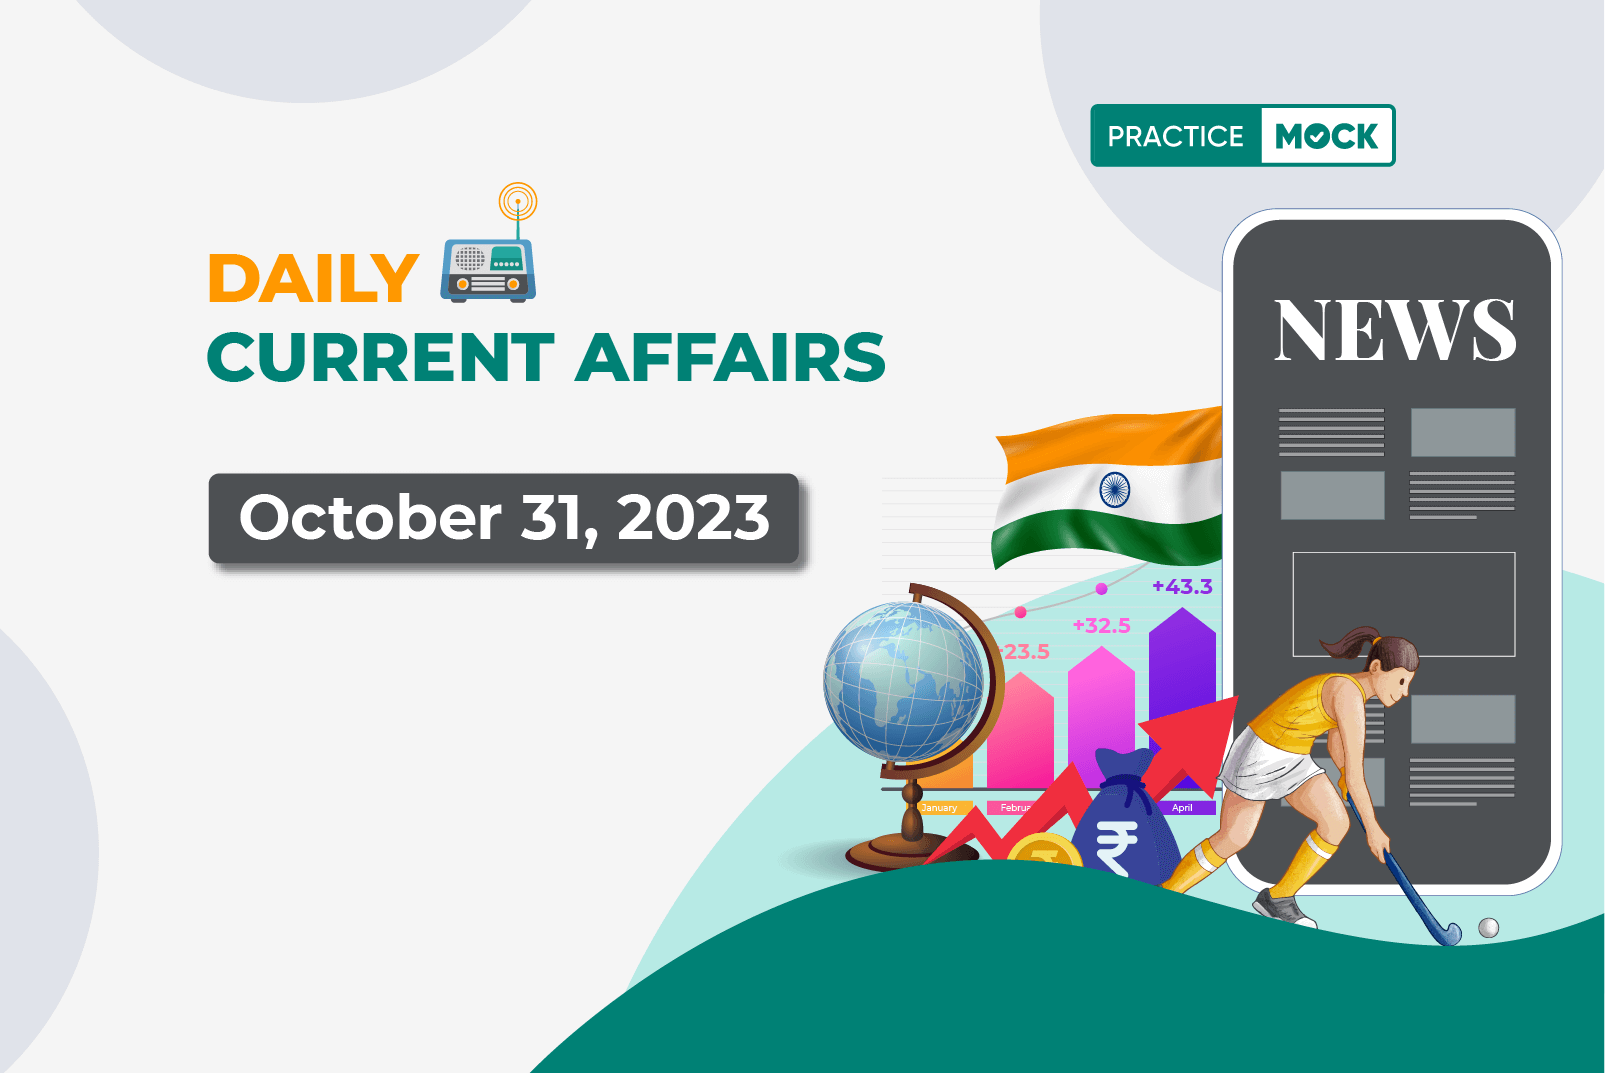 Daily Current Affairs- October 31, 2023